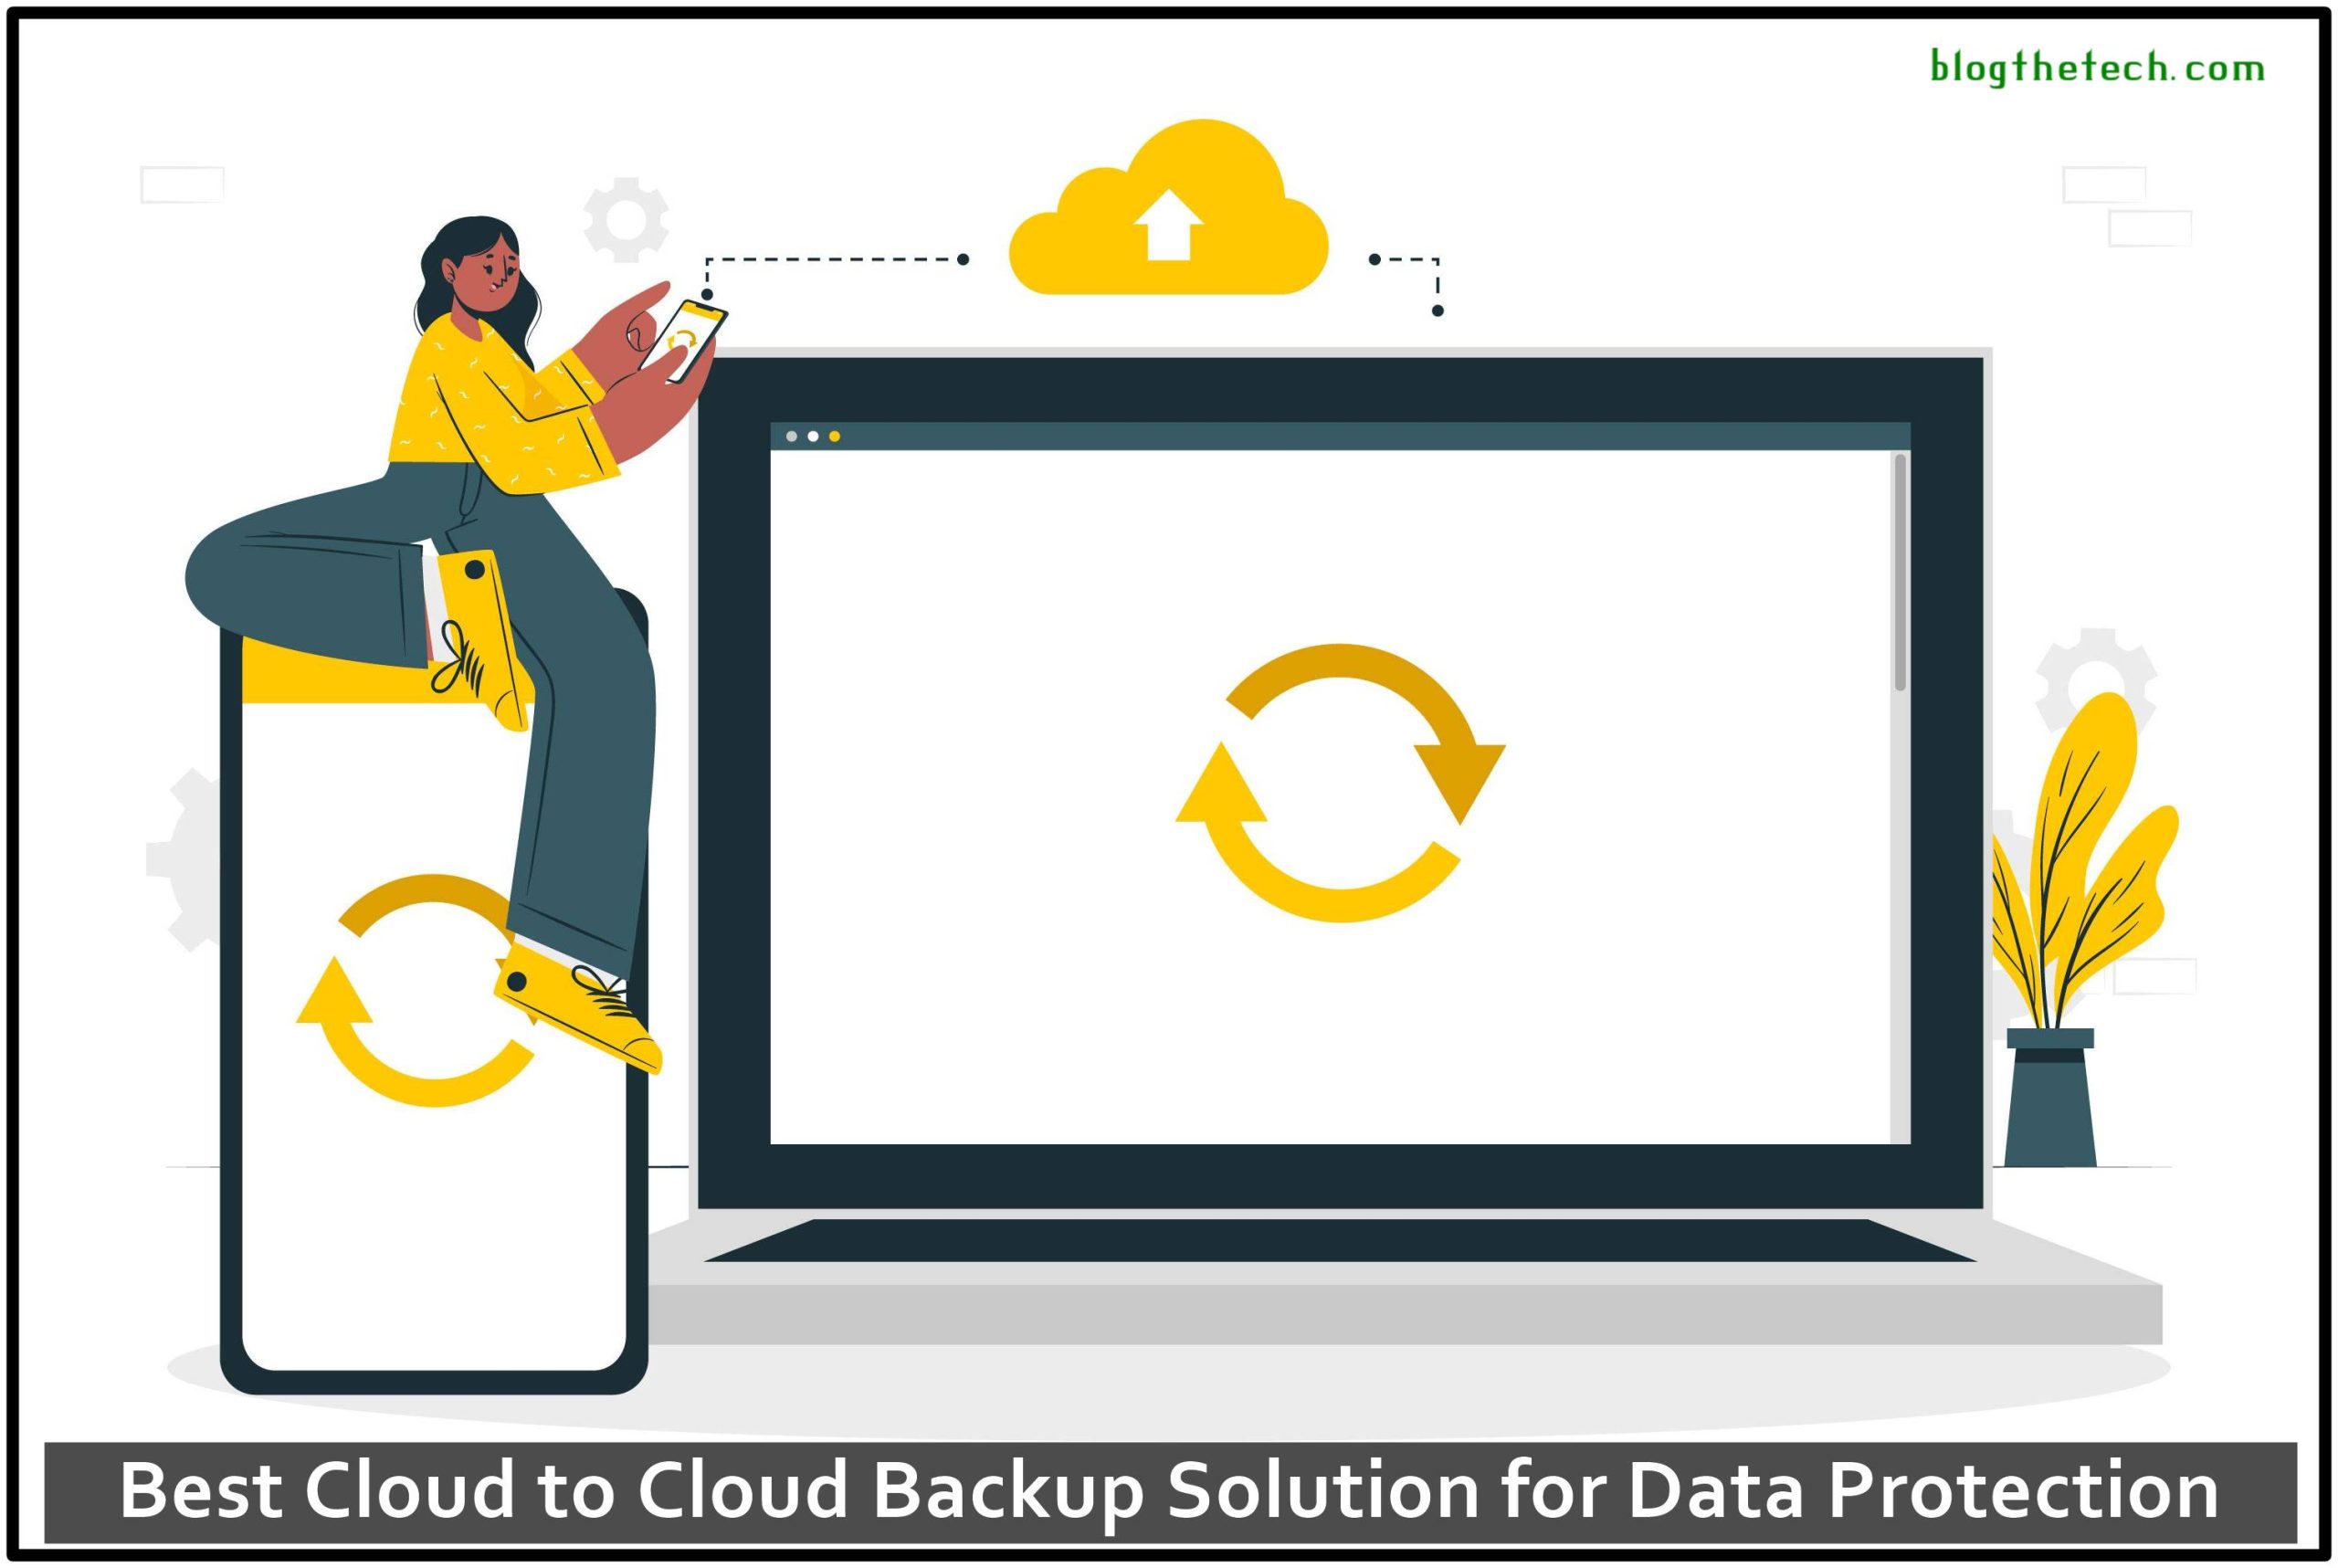 Best Cloud to Cloud Backup Solution for Data Protection